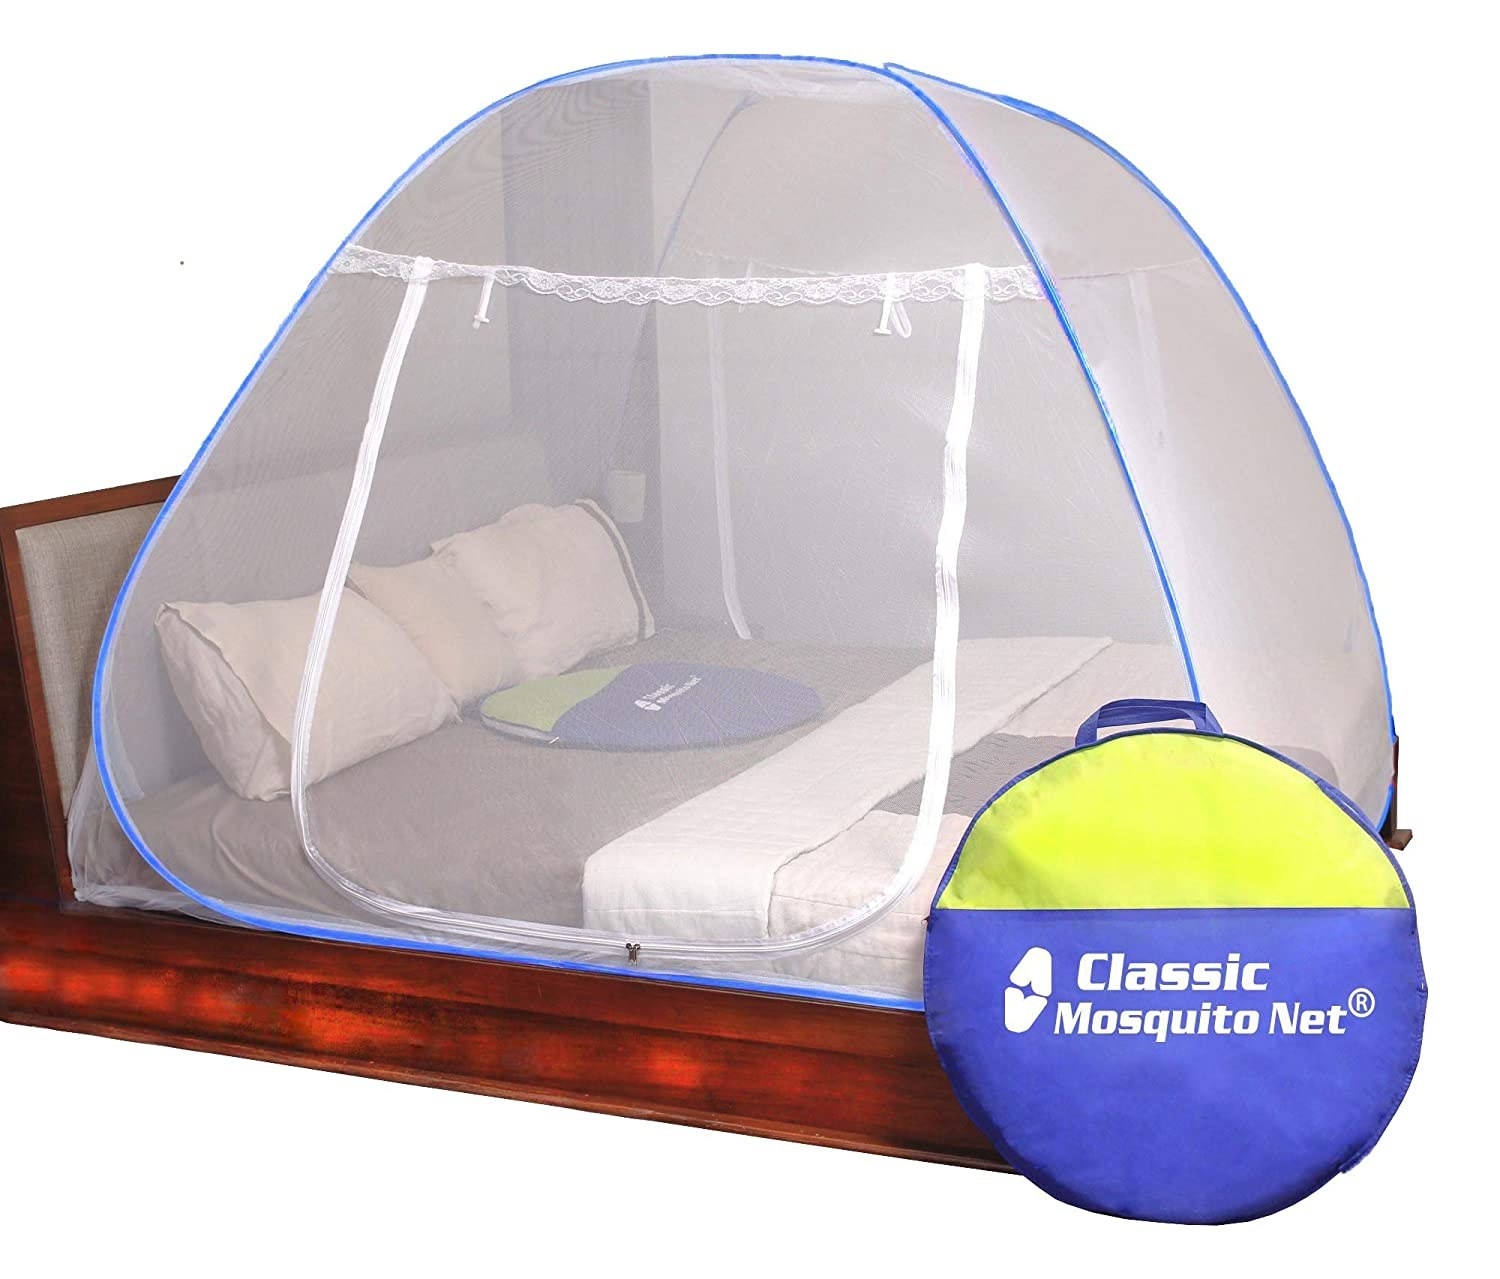 A white and blue mosquito net tented over a bed, with its storage cover next to it.